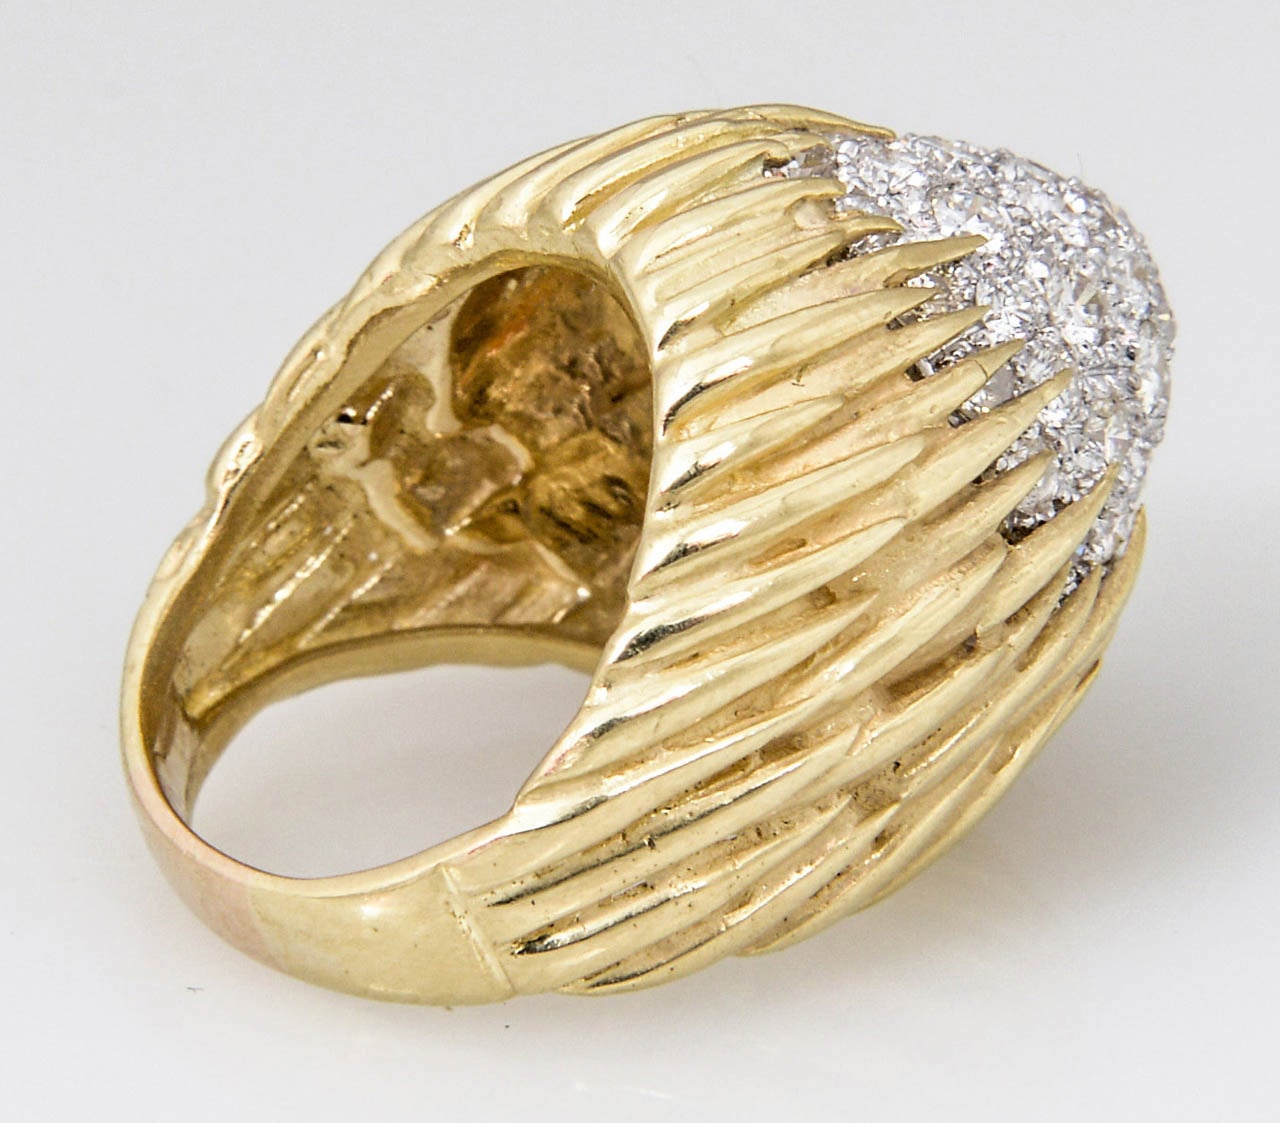 1960s-1970s Pave Diamond Gold Floral Design Dome Ring 2